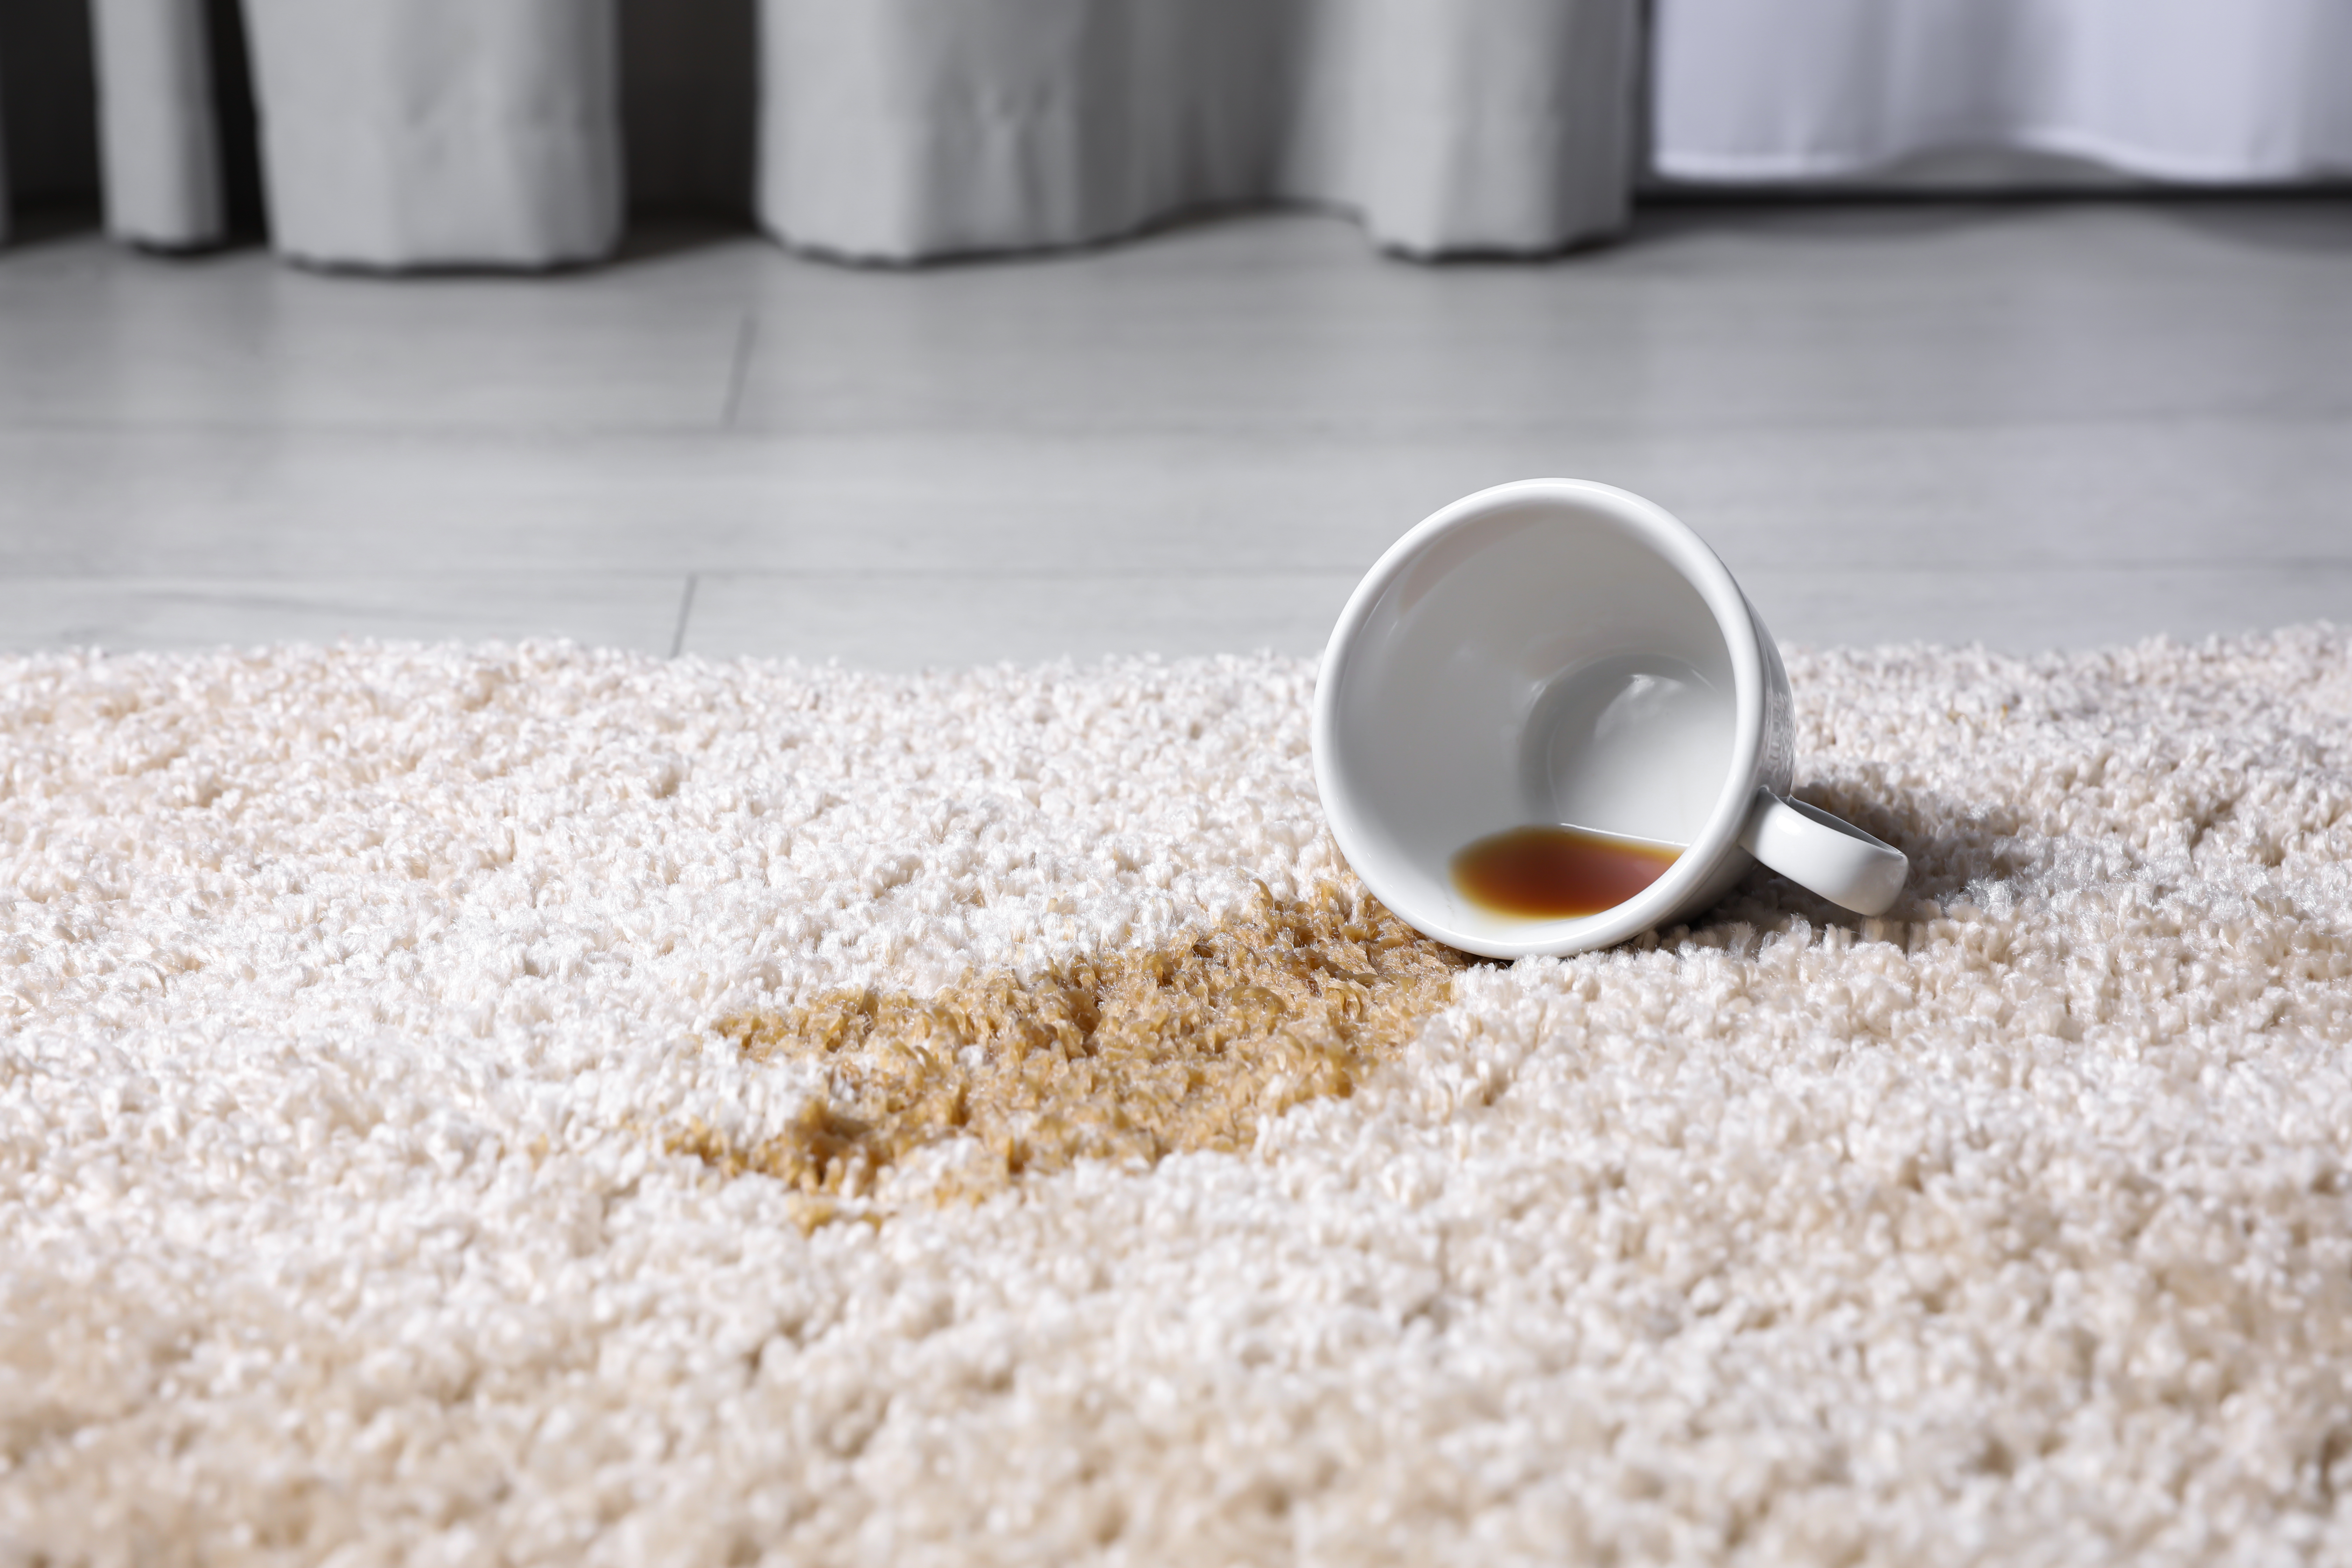 A drink spilled on a faux fur rug | Source: Getty Images